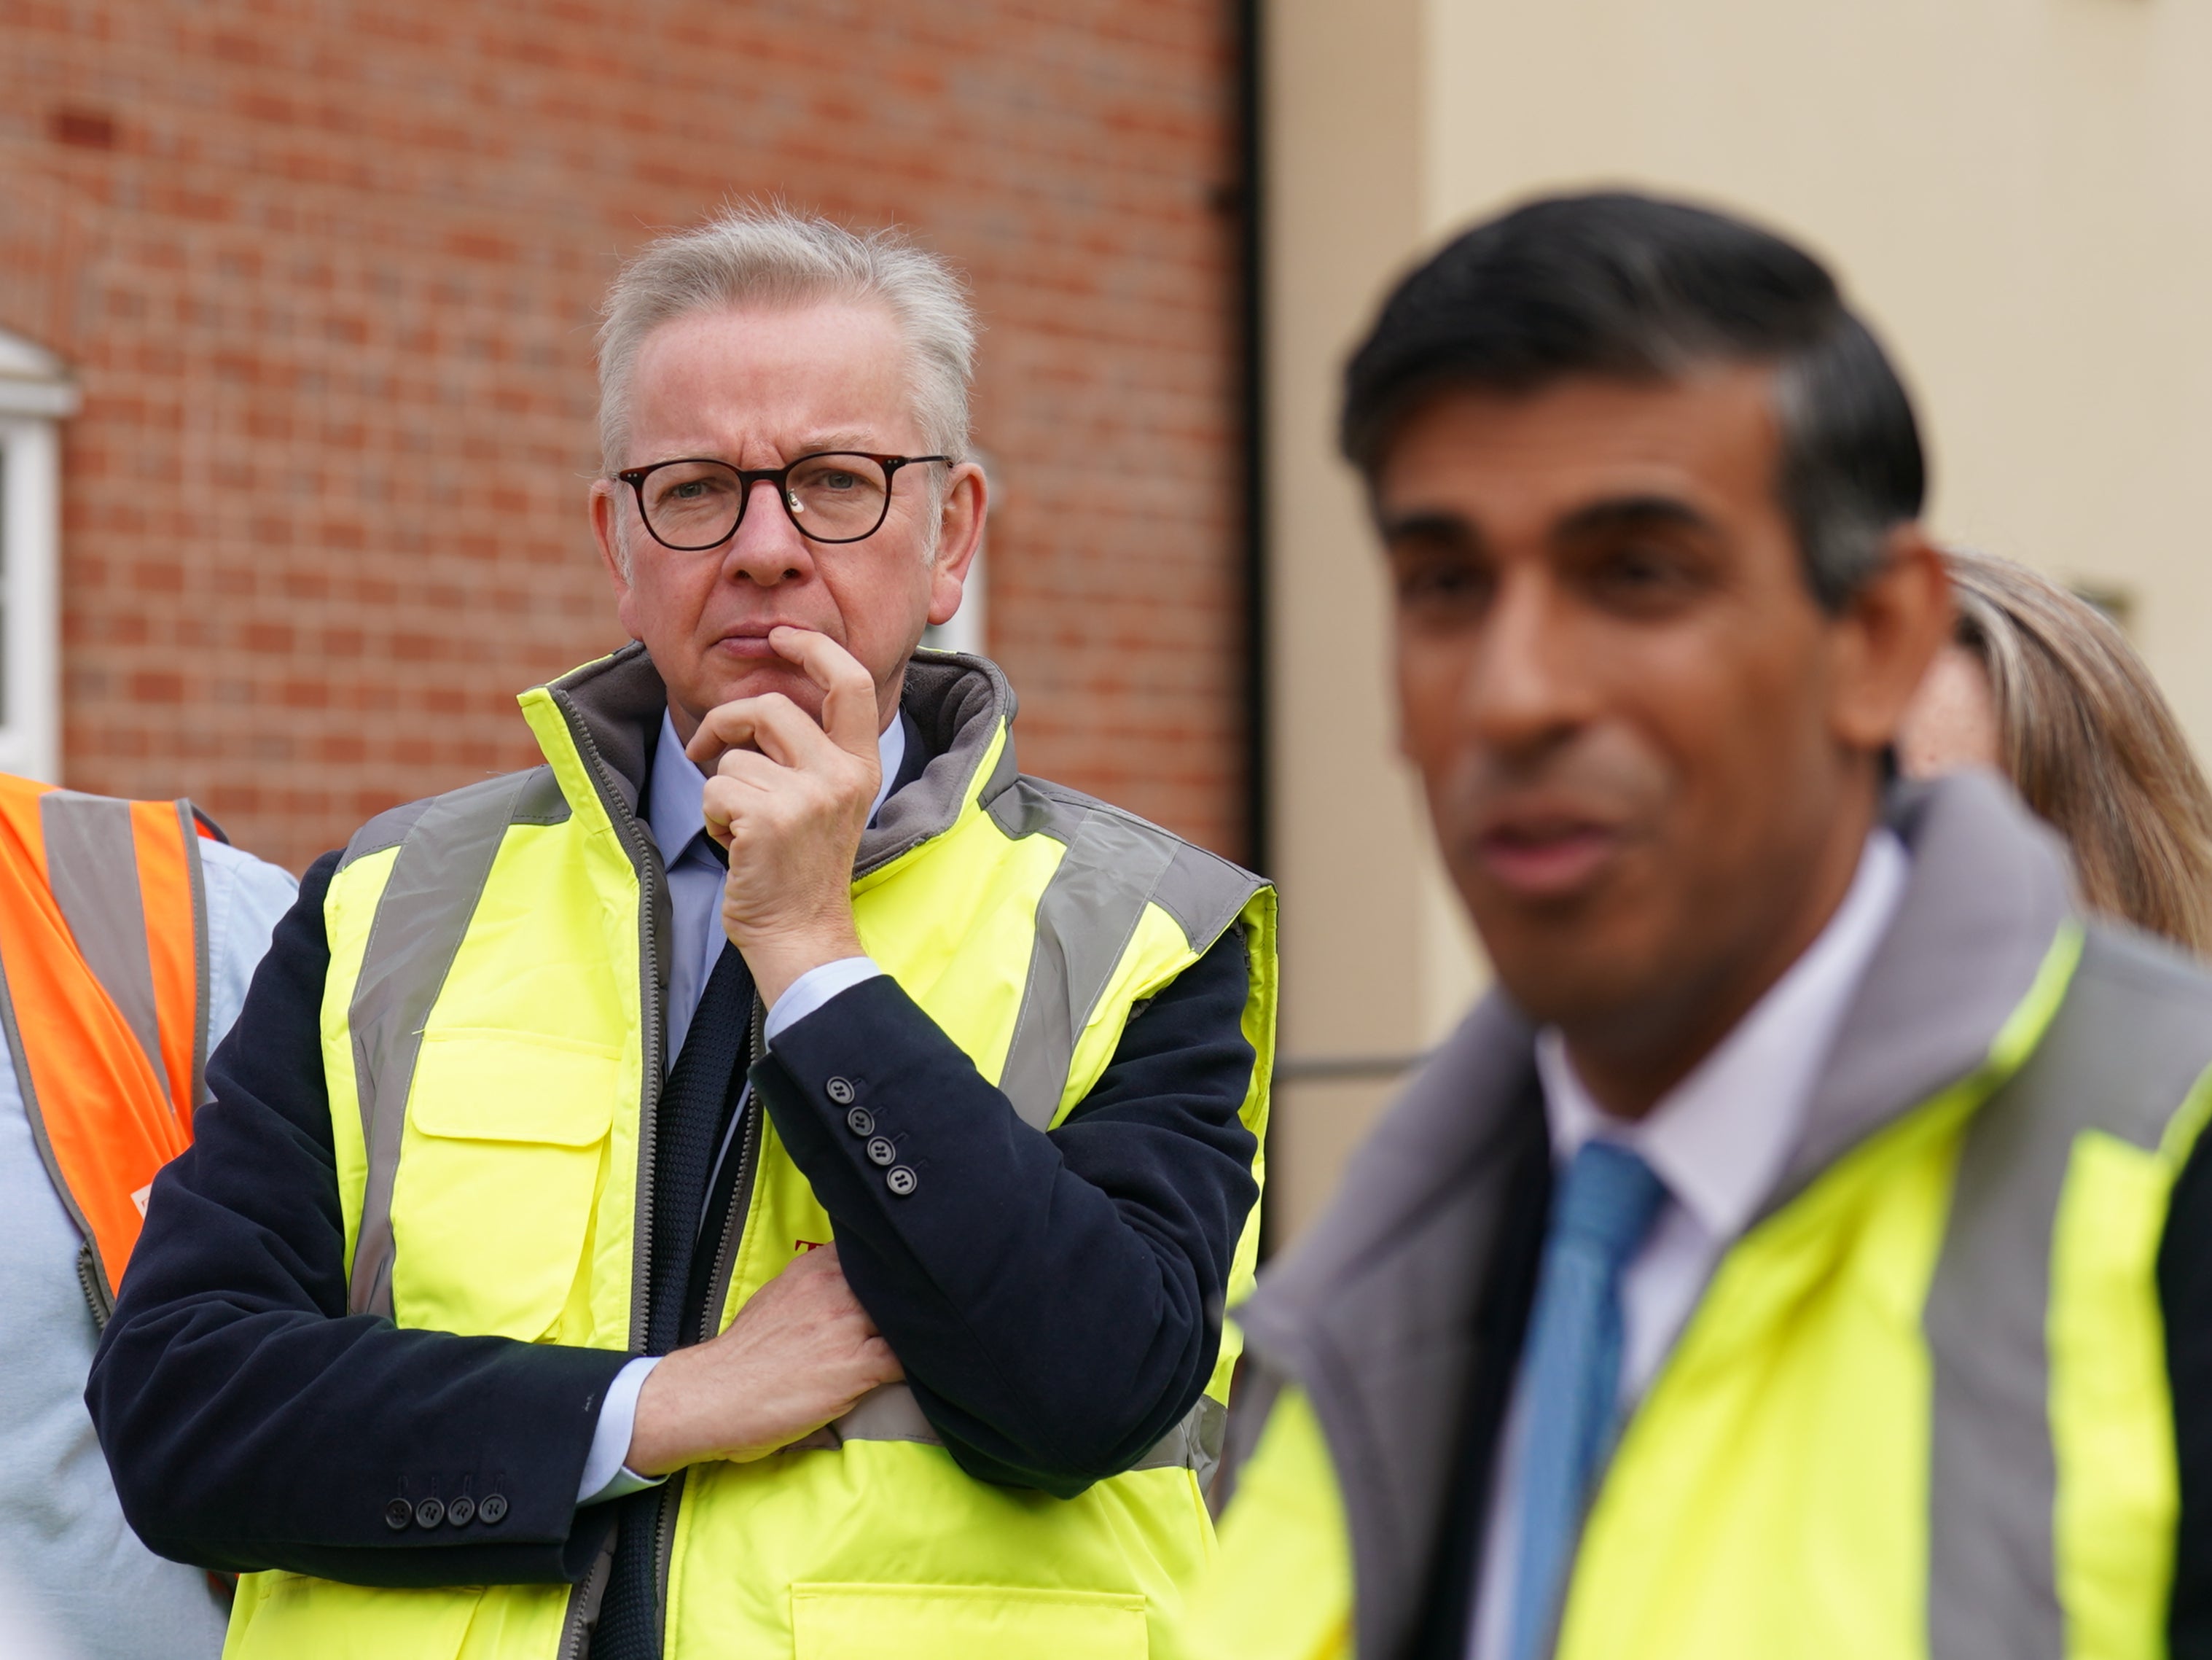 Mr Gove promised greater protections for tenants – while Rishi Sunak faces growing anger over fresh delays